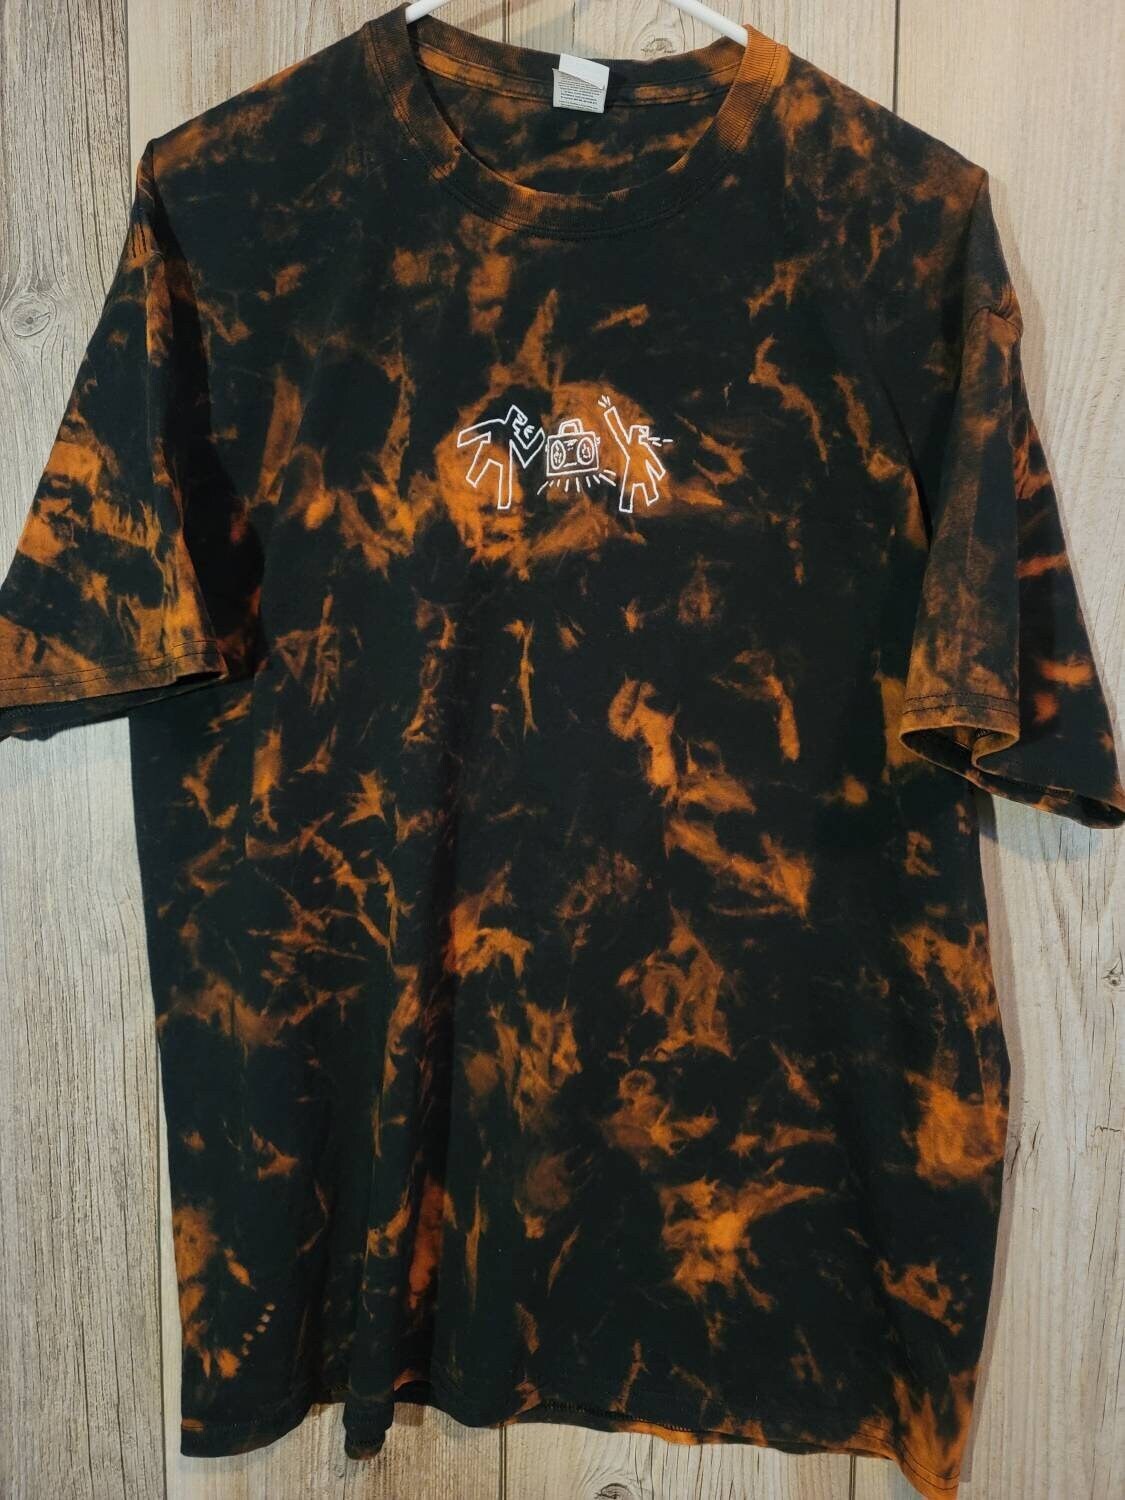 Discover Bleached Embroidered Dance Tie Dye Tee | Reverse Dye